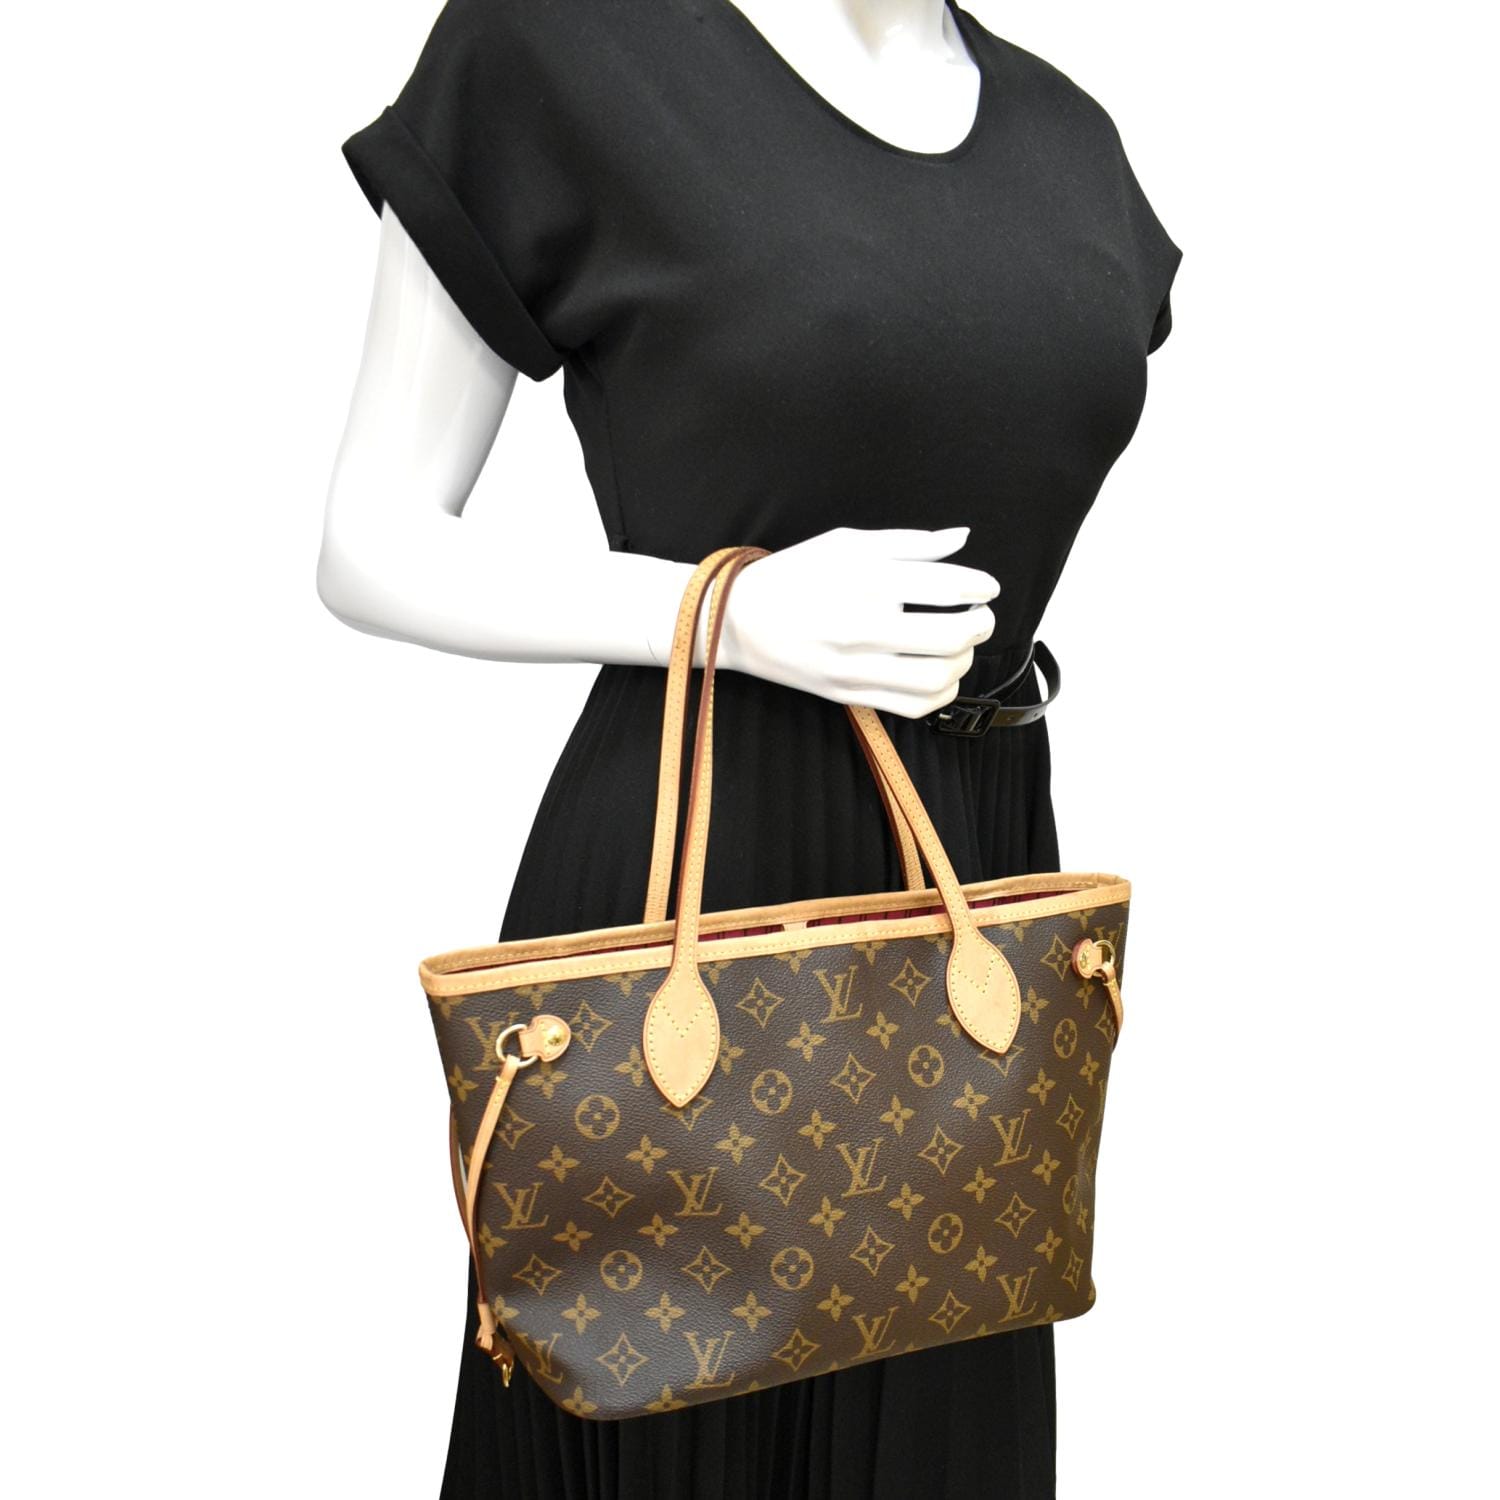 5 Ways To Style Your Louis Vuitton Neverfull